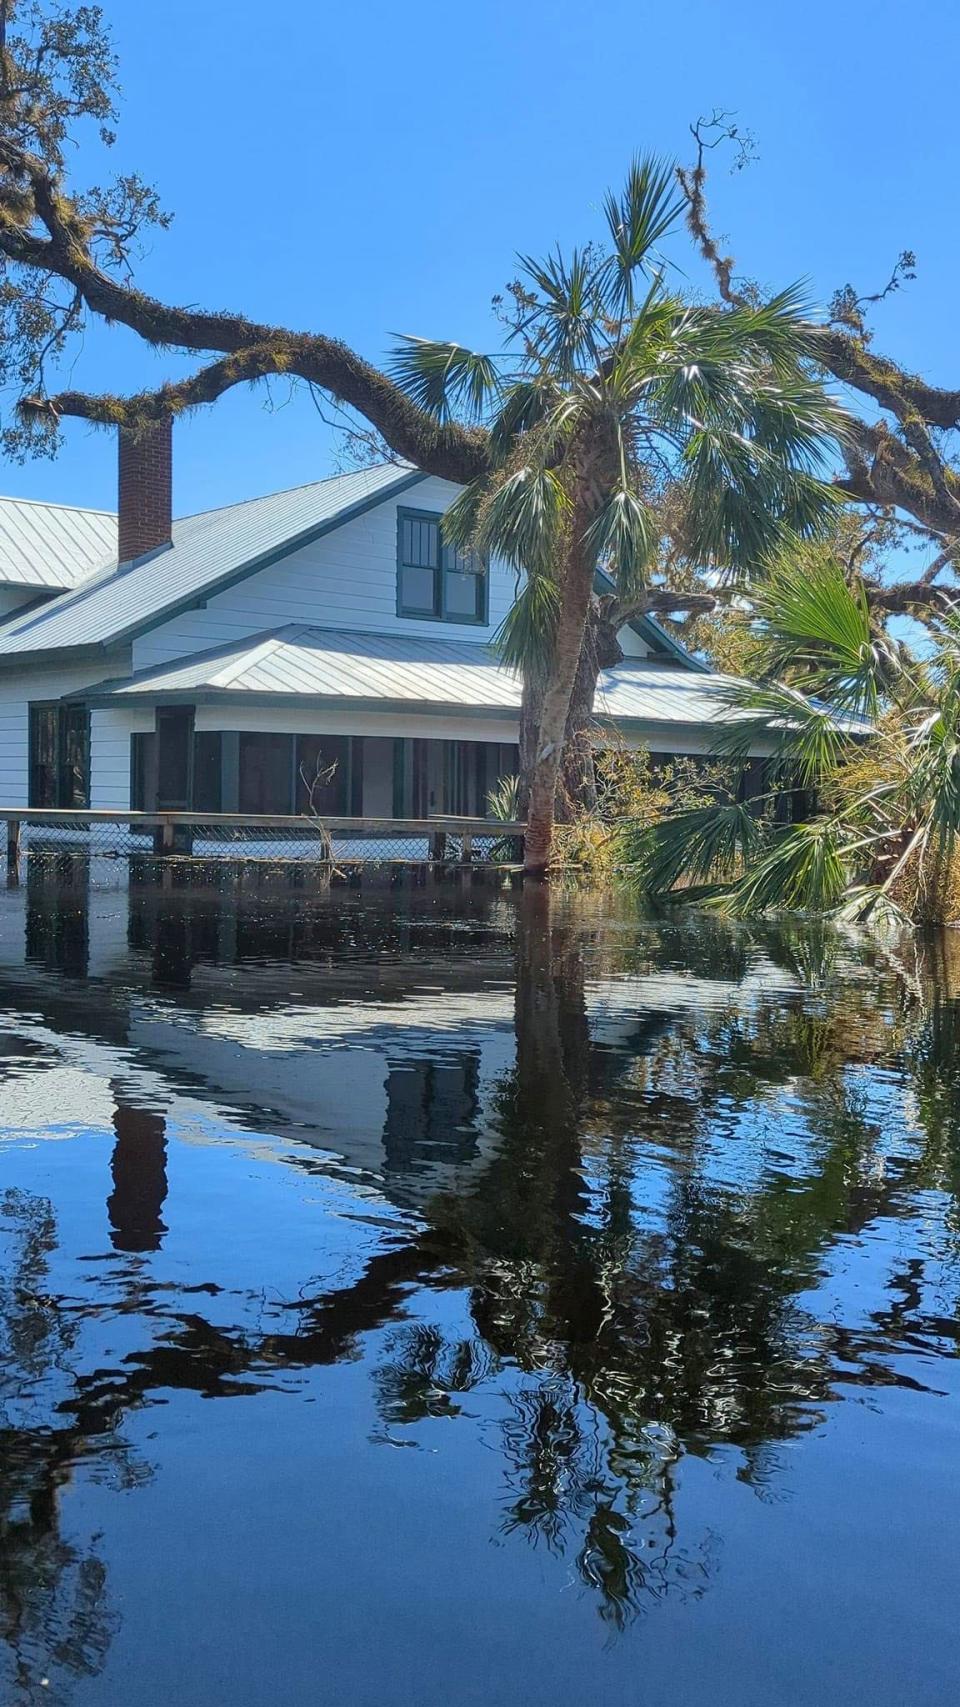 Cheri Pachota, co-owner of Snook Haven, provided this photo showing flooding at Snook Haven on the Myakka River.